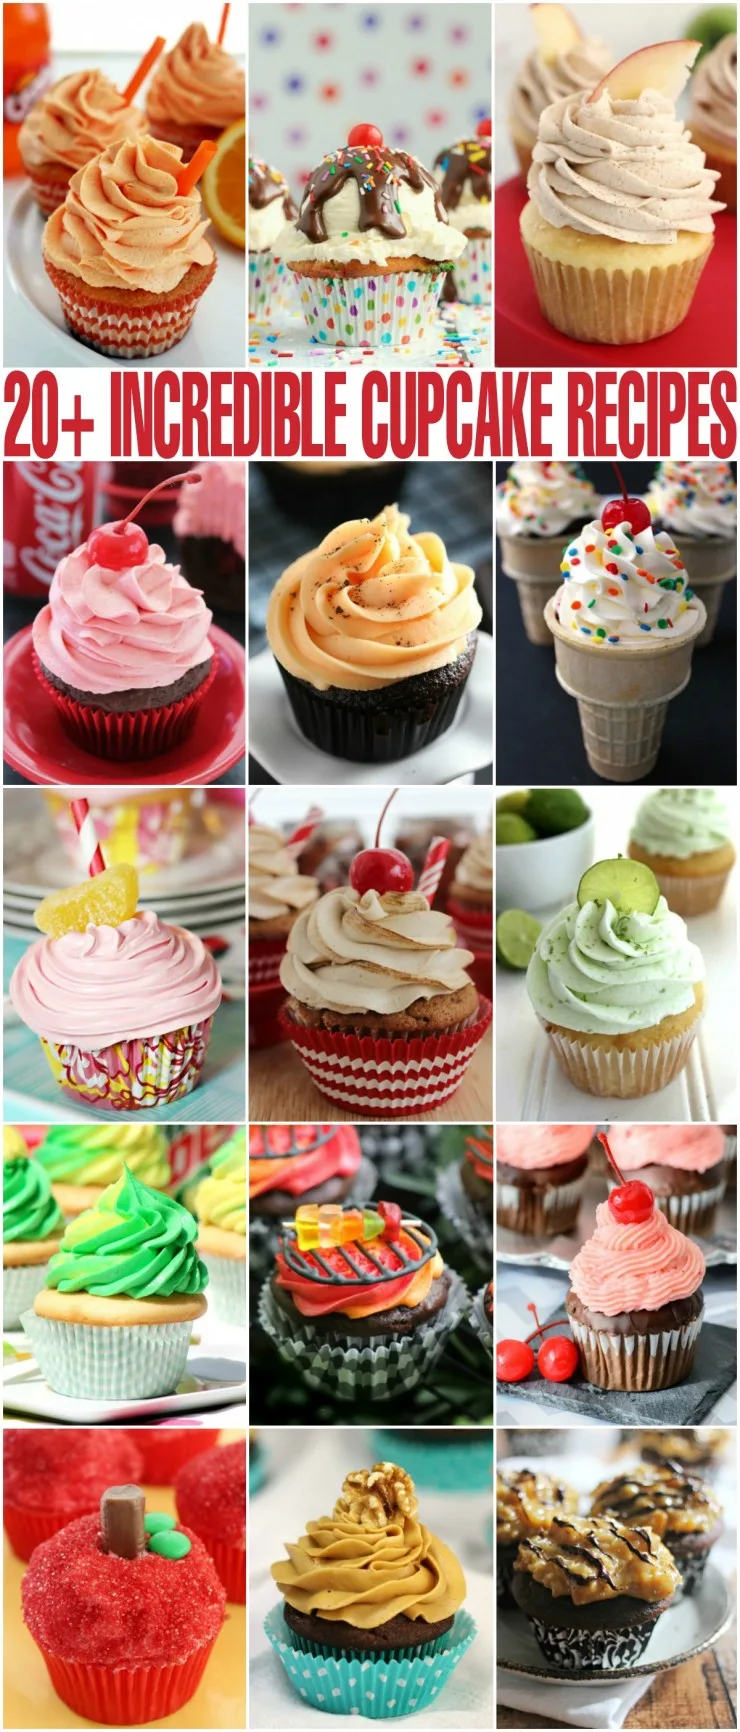 I've curated a list of over 20 incredibly delicious cupcake recipes to inspire you towards more cupcake greatness. Everyone loves cupcakes!